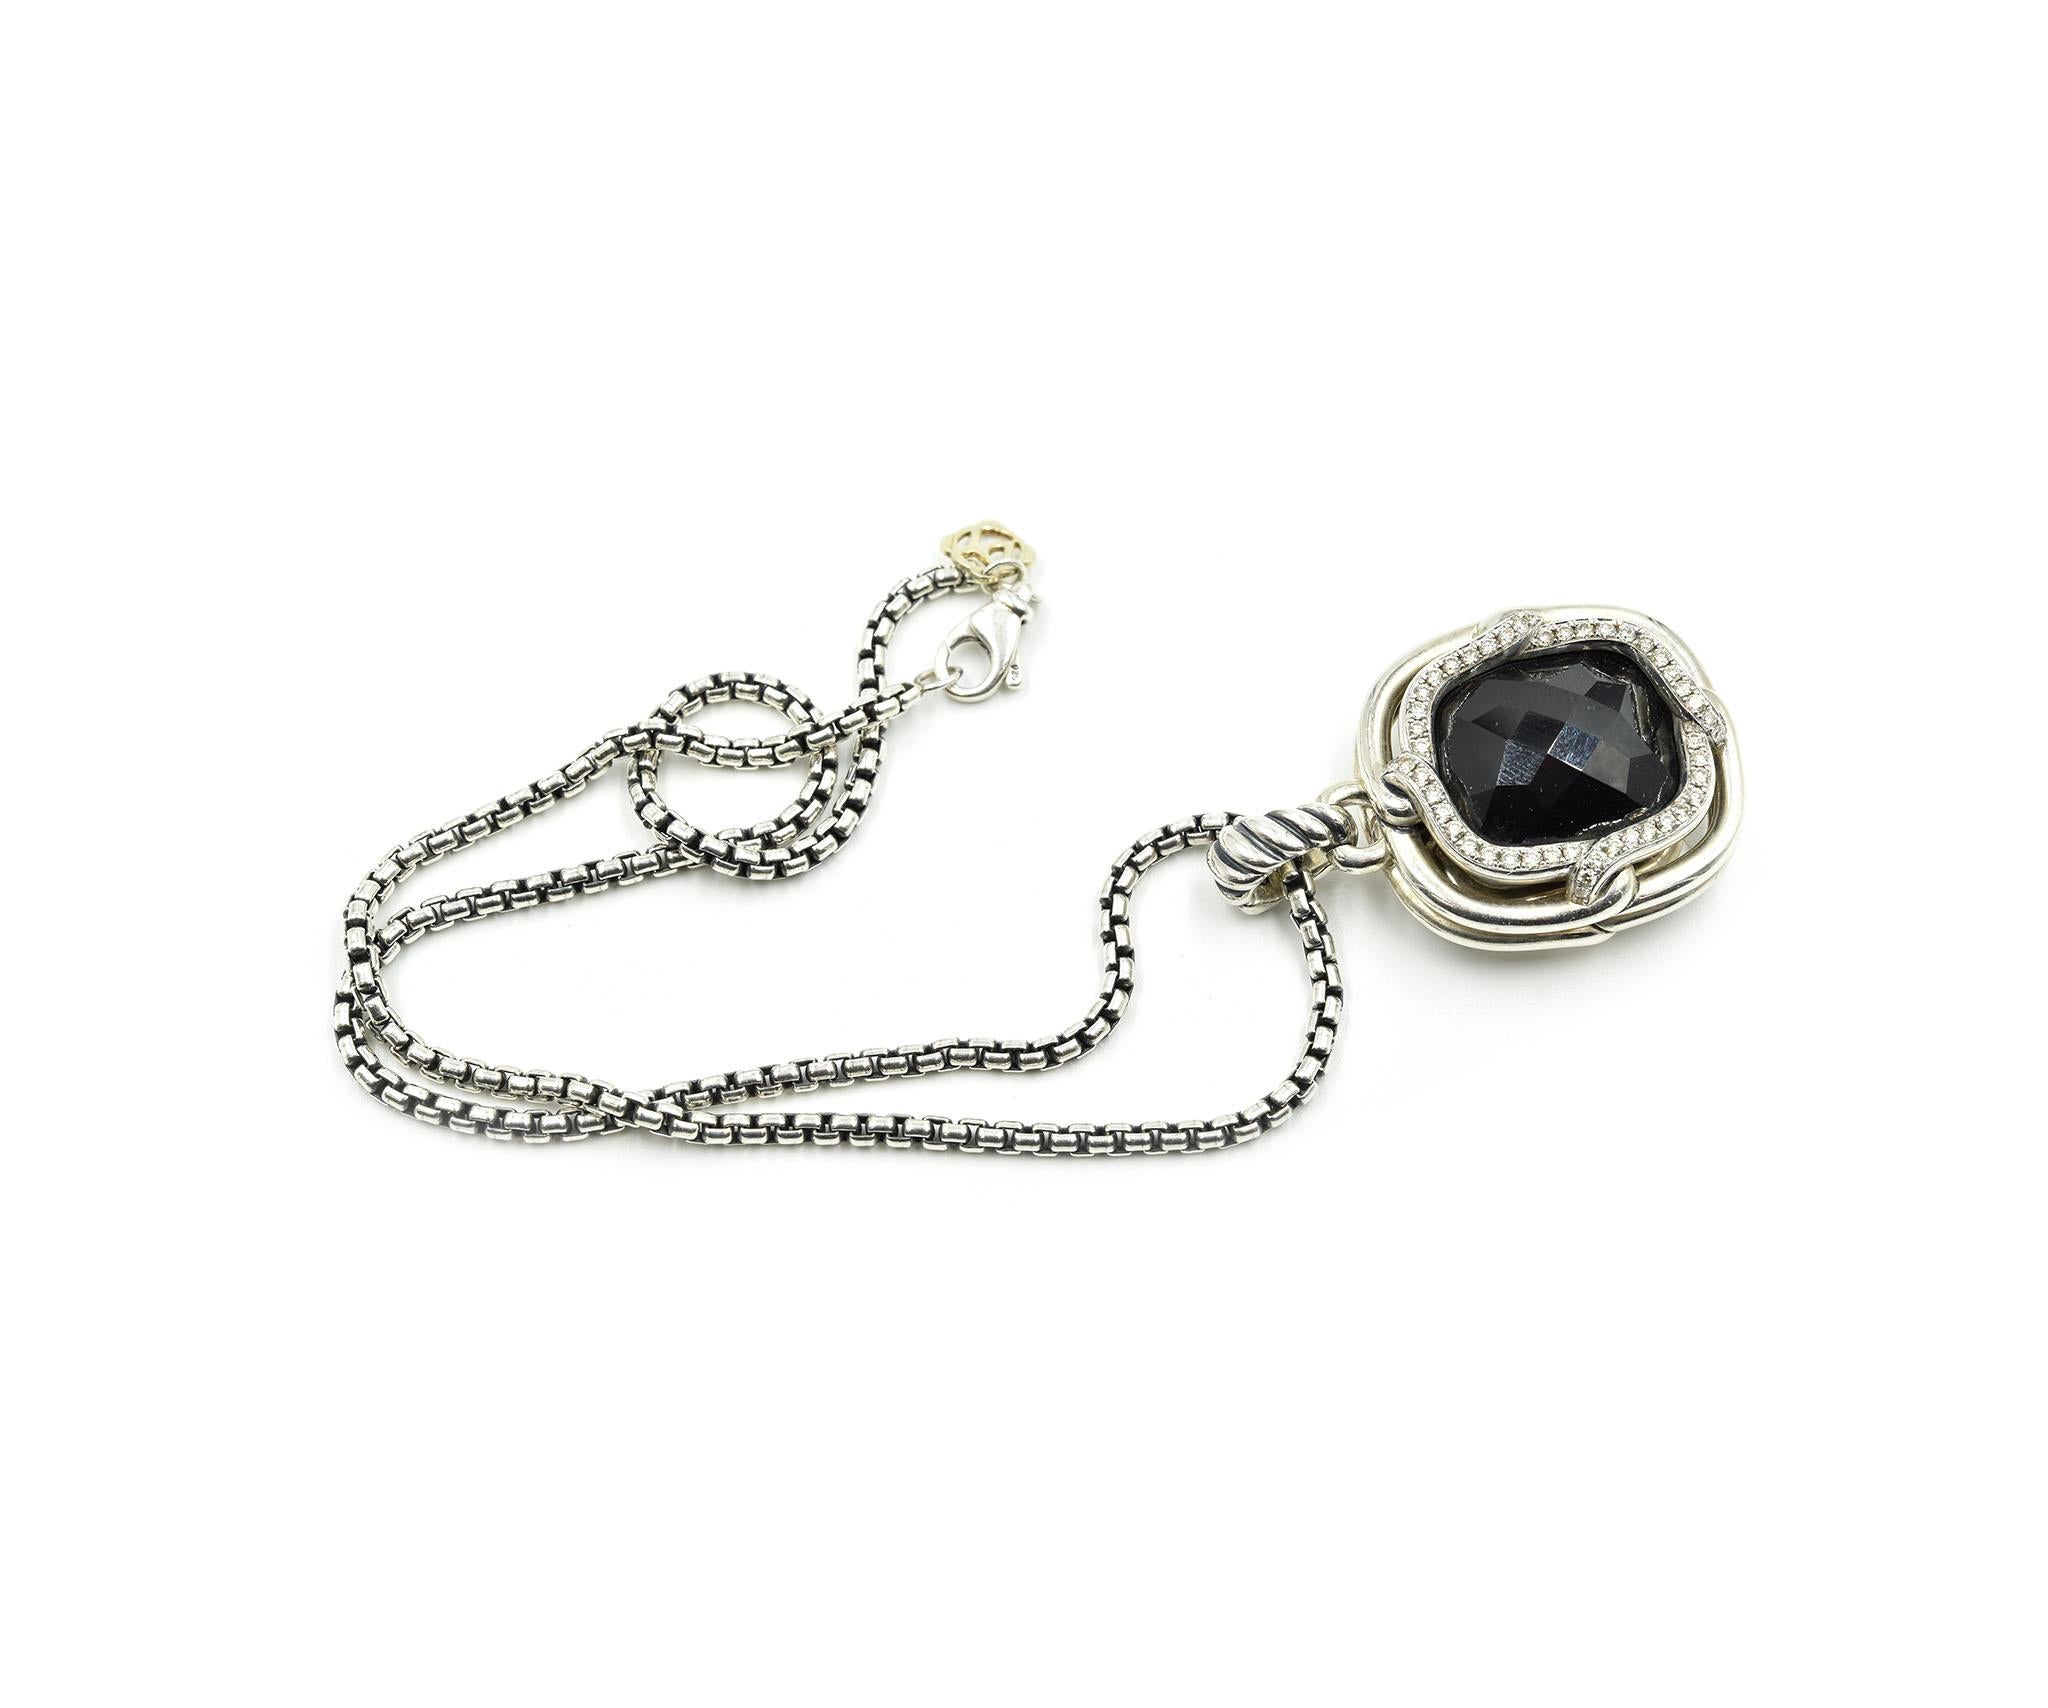 Designer: David Yurman
Material: sterling silver
Diamonds: 48 round brilliant cuts = 0.72 carat total weight
Dimensions: the pendant measures 1 1/4 inches long and 1 inches wide, the necklace measures 16 inches long 
Weight: 41.20 grams
Retail: